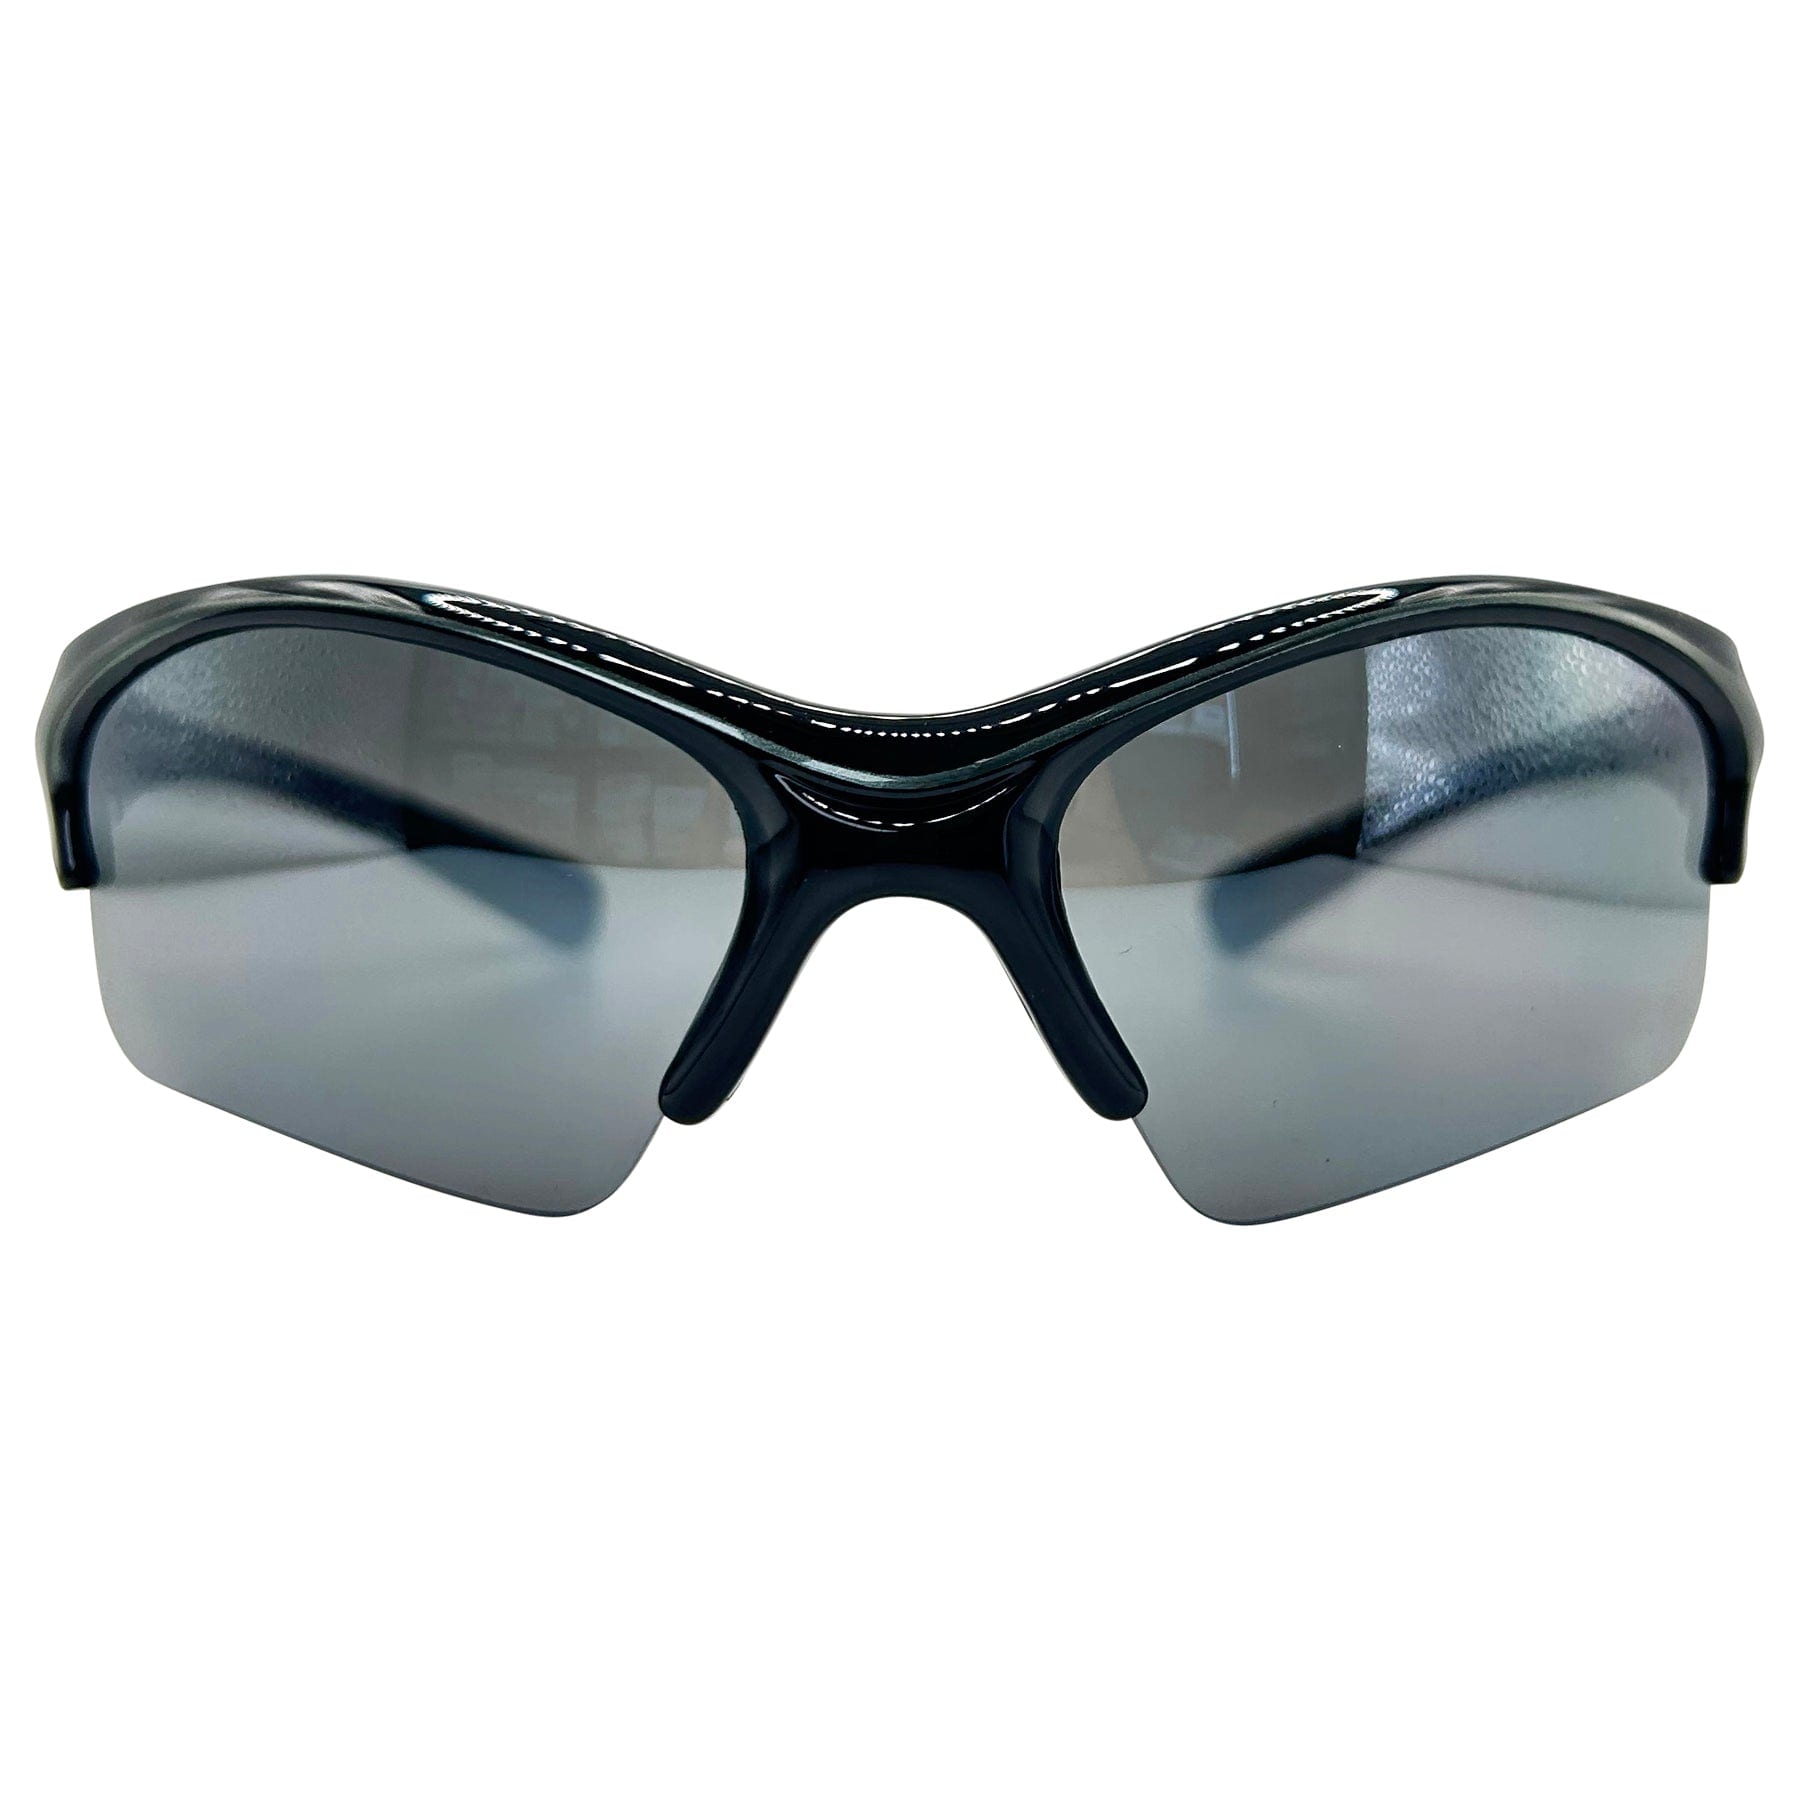 mirrored men's sunglasses with a 90s style sports frame